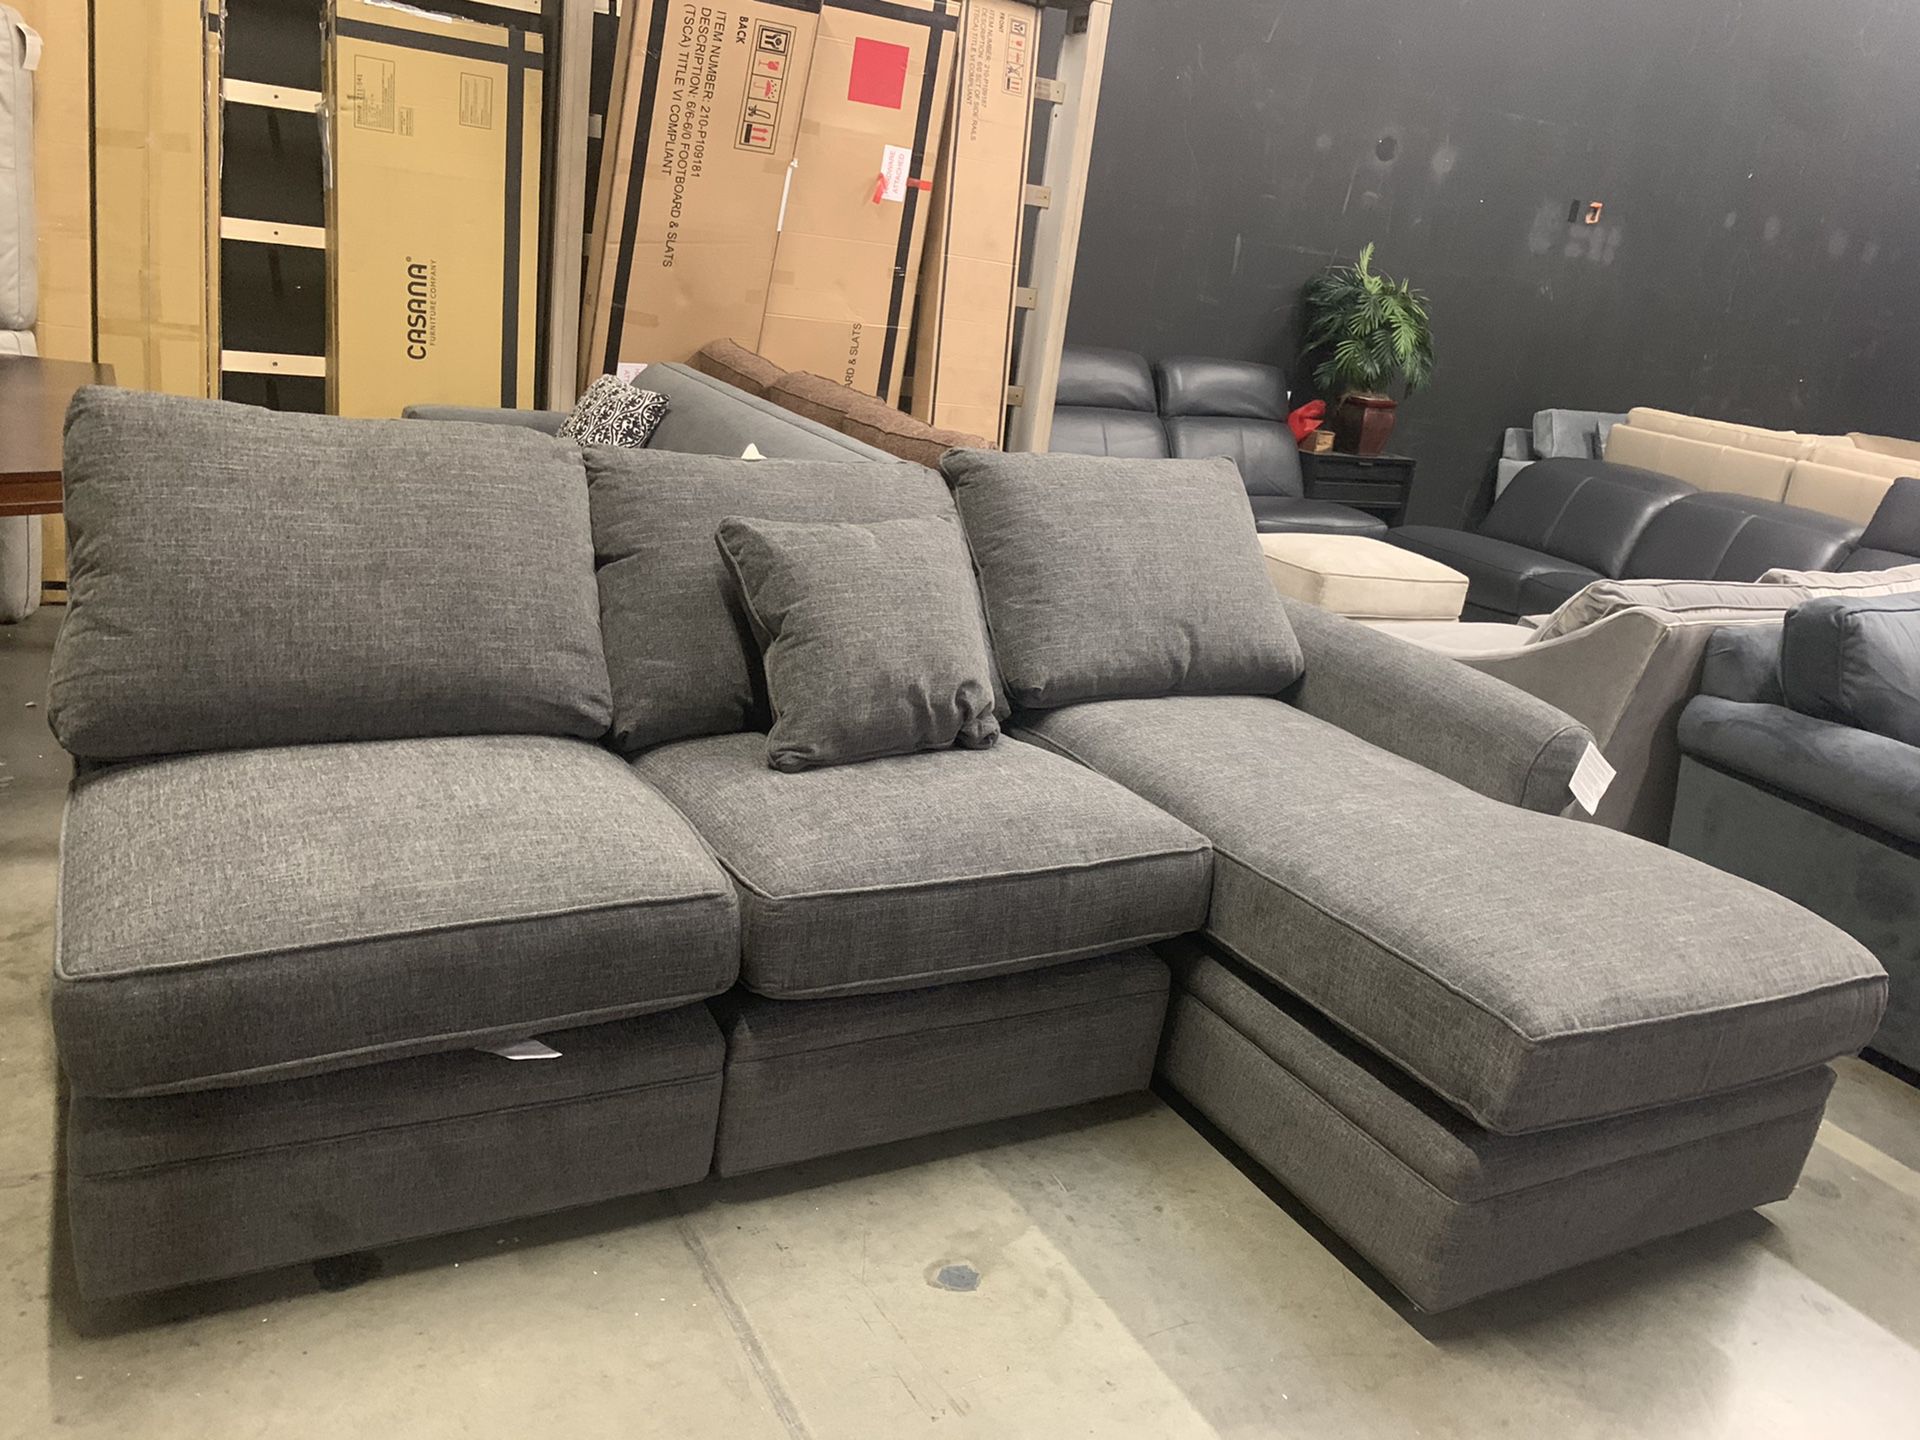 Curious Charcoal 3 piece sectional couch